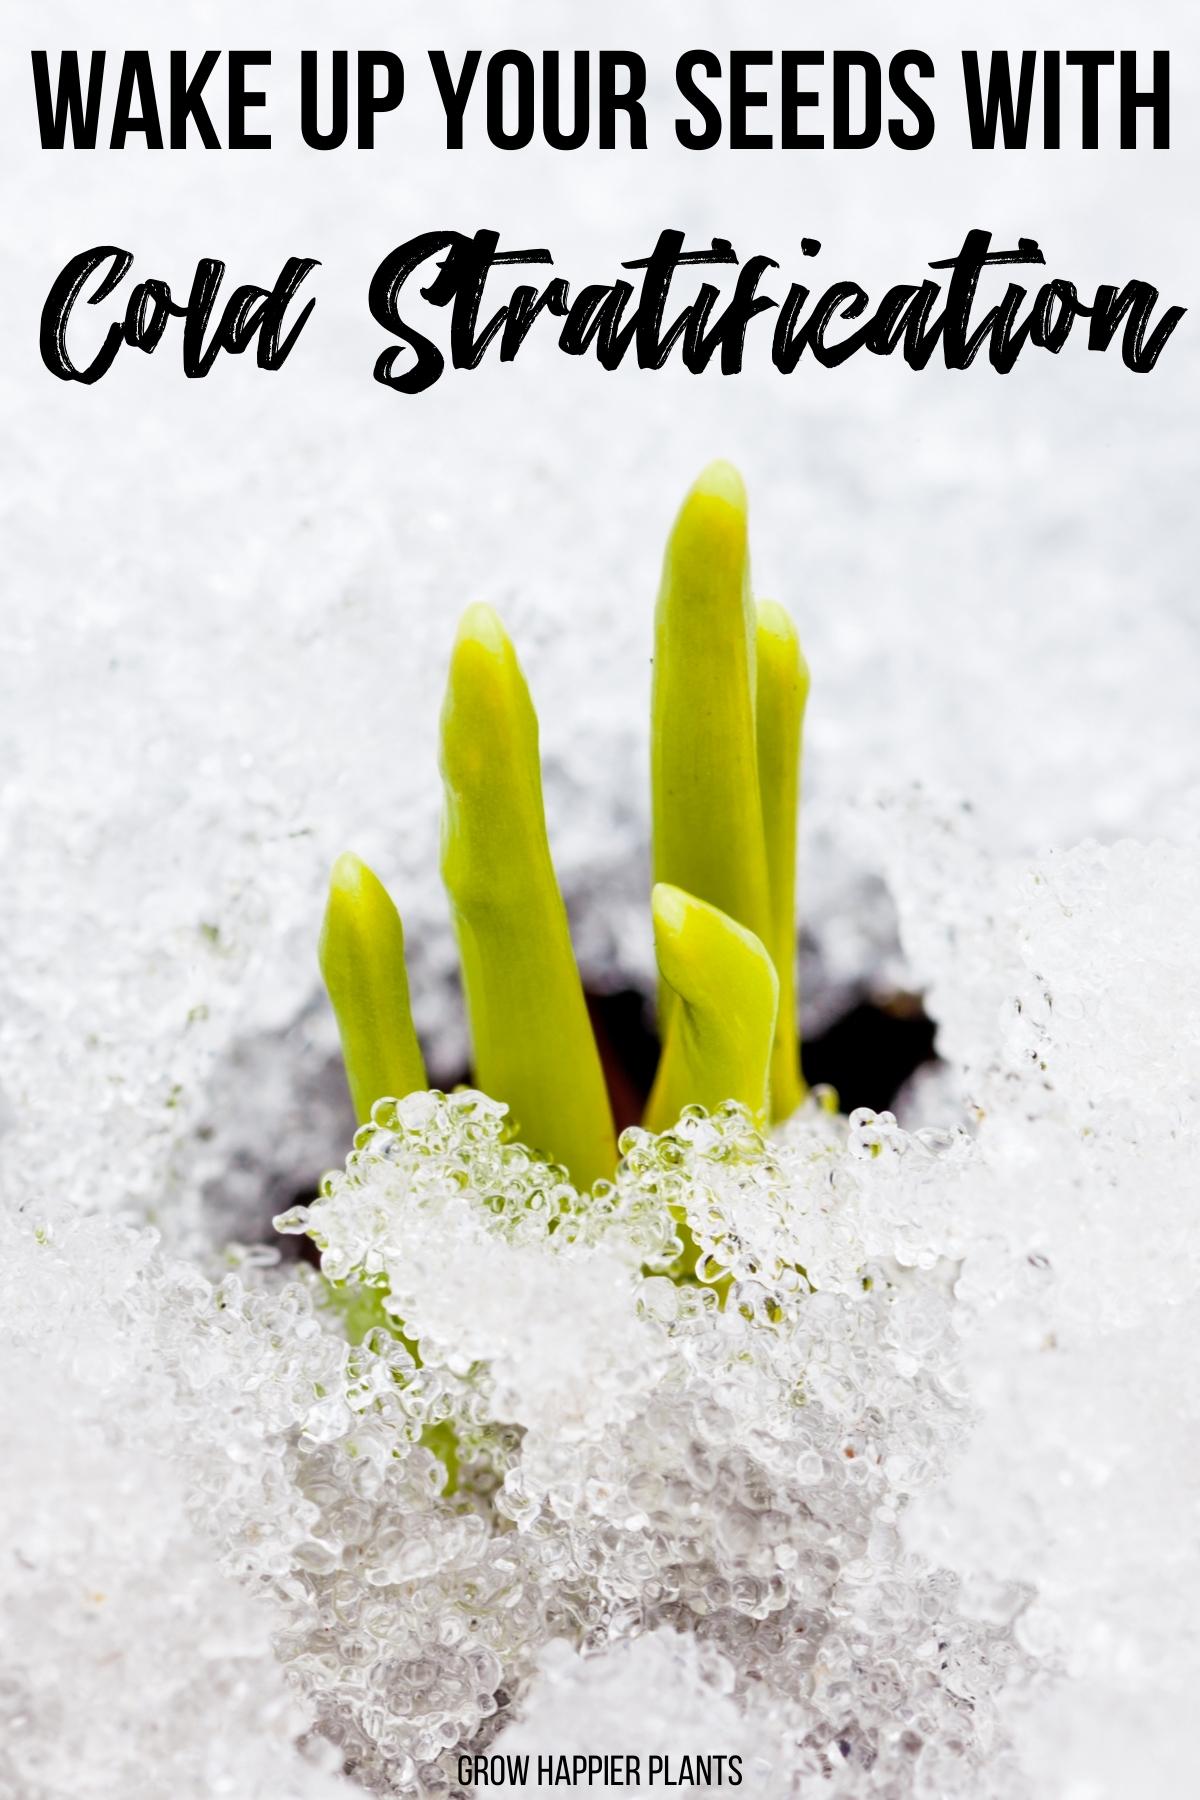 seedling growing through snow with text overlay "wake up your seeds with cold stratification"